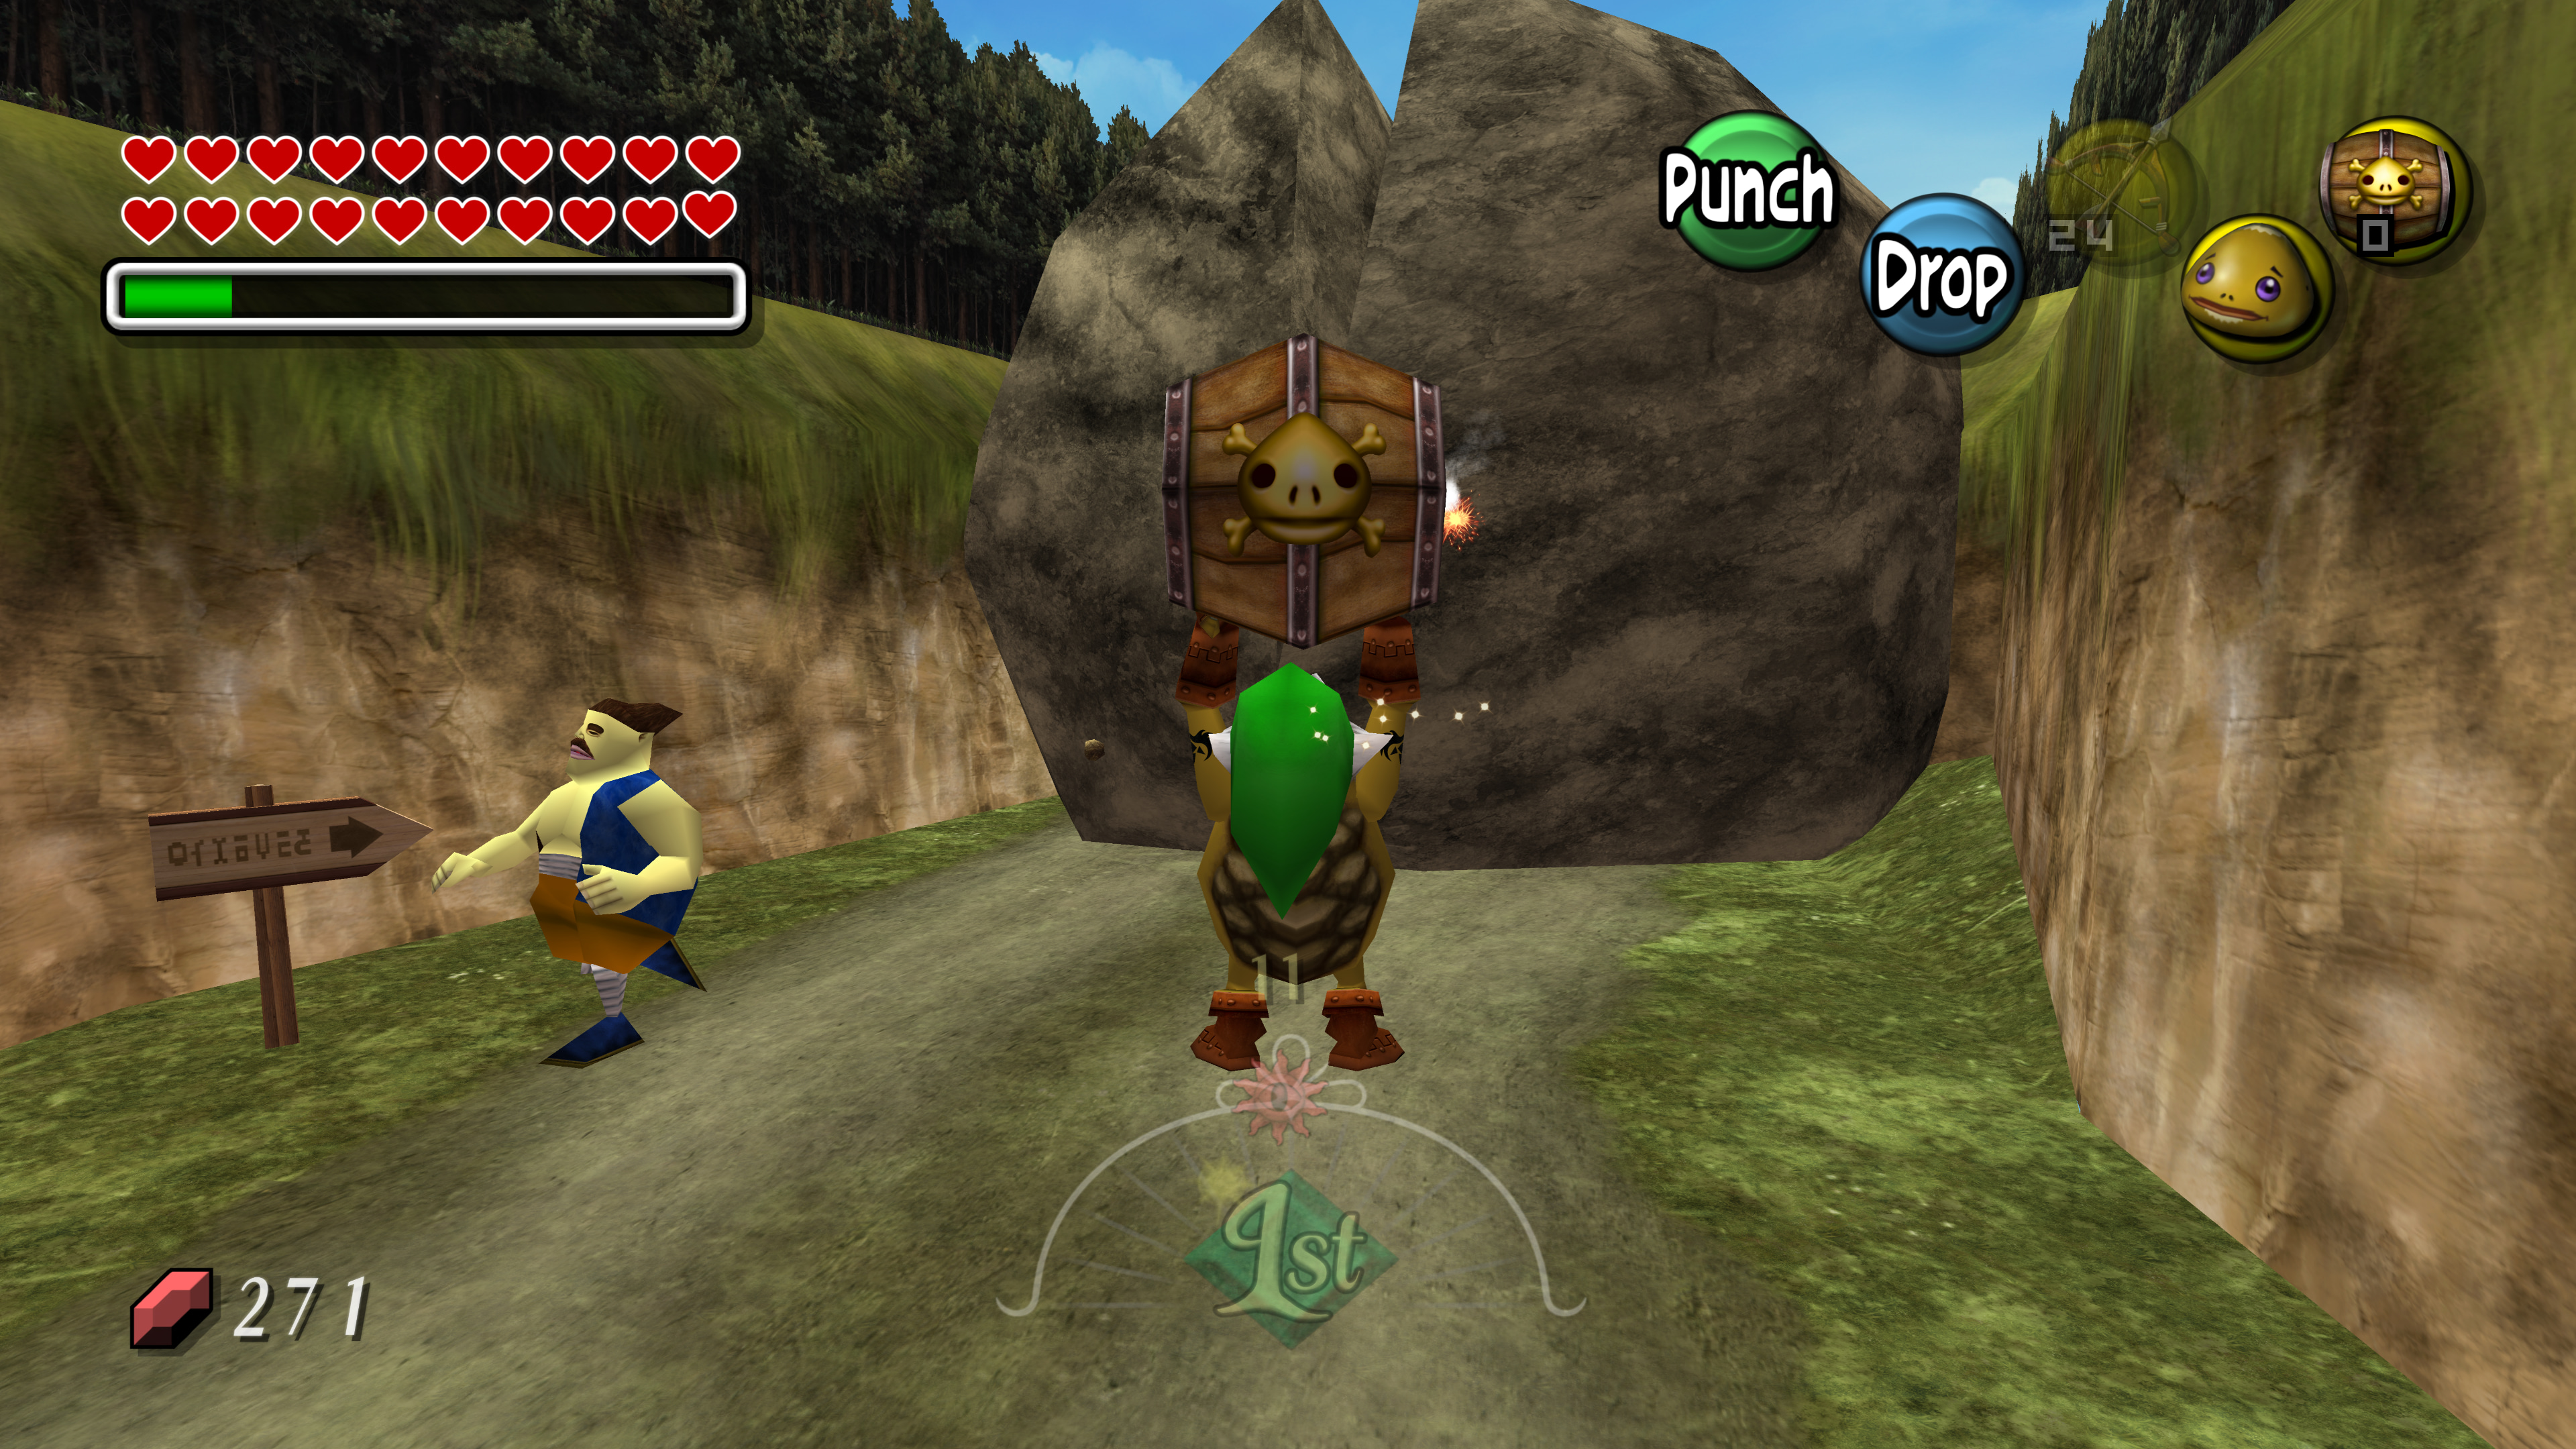 majora's mask texture pack project 64